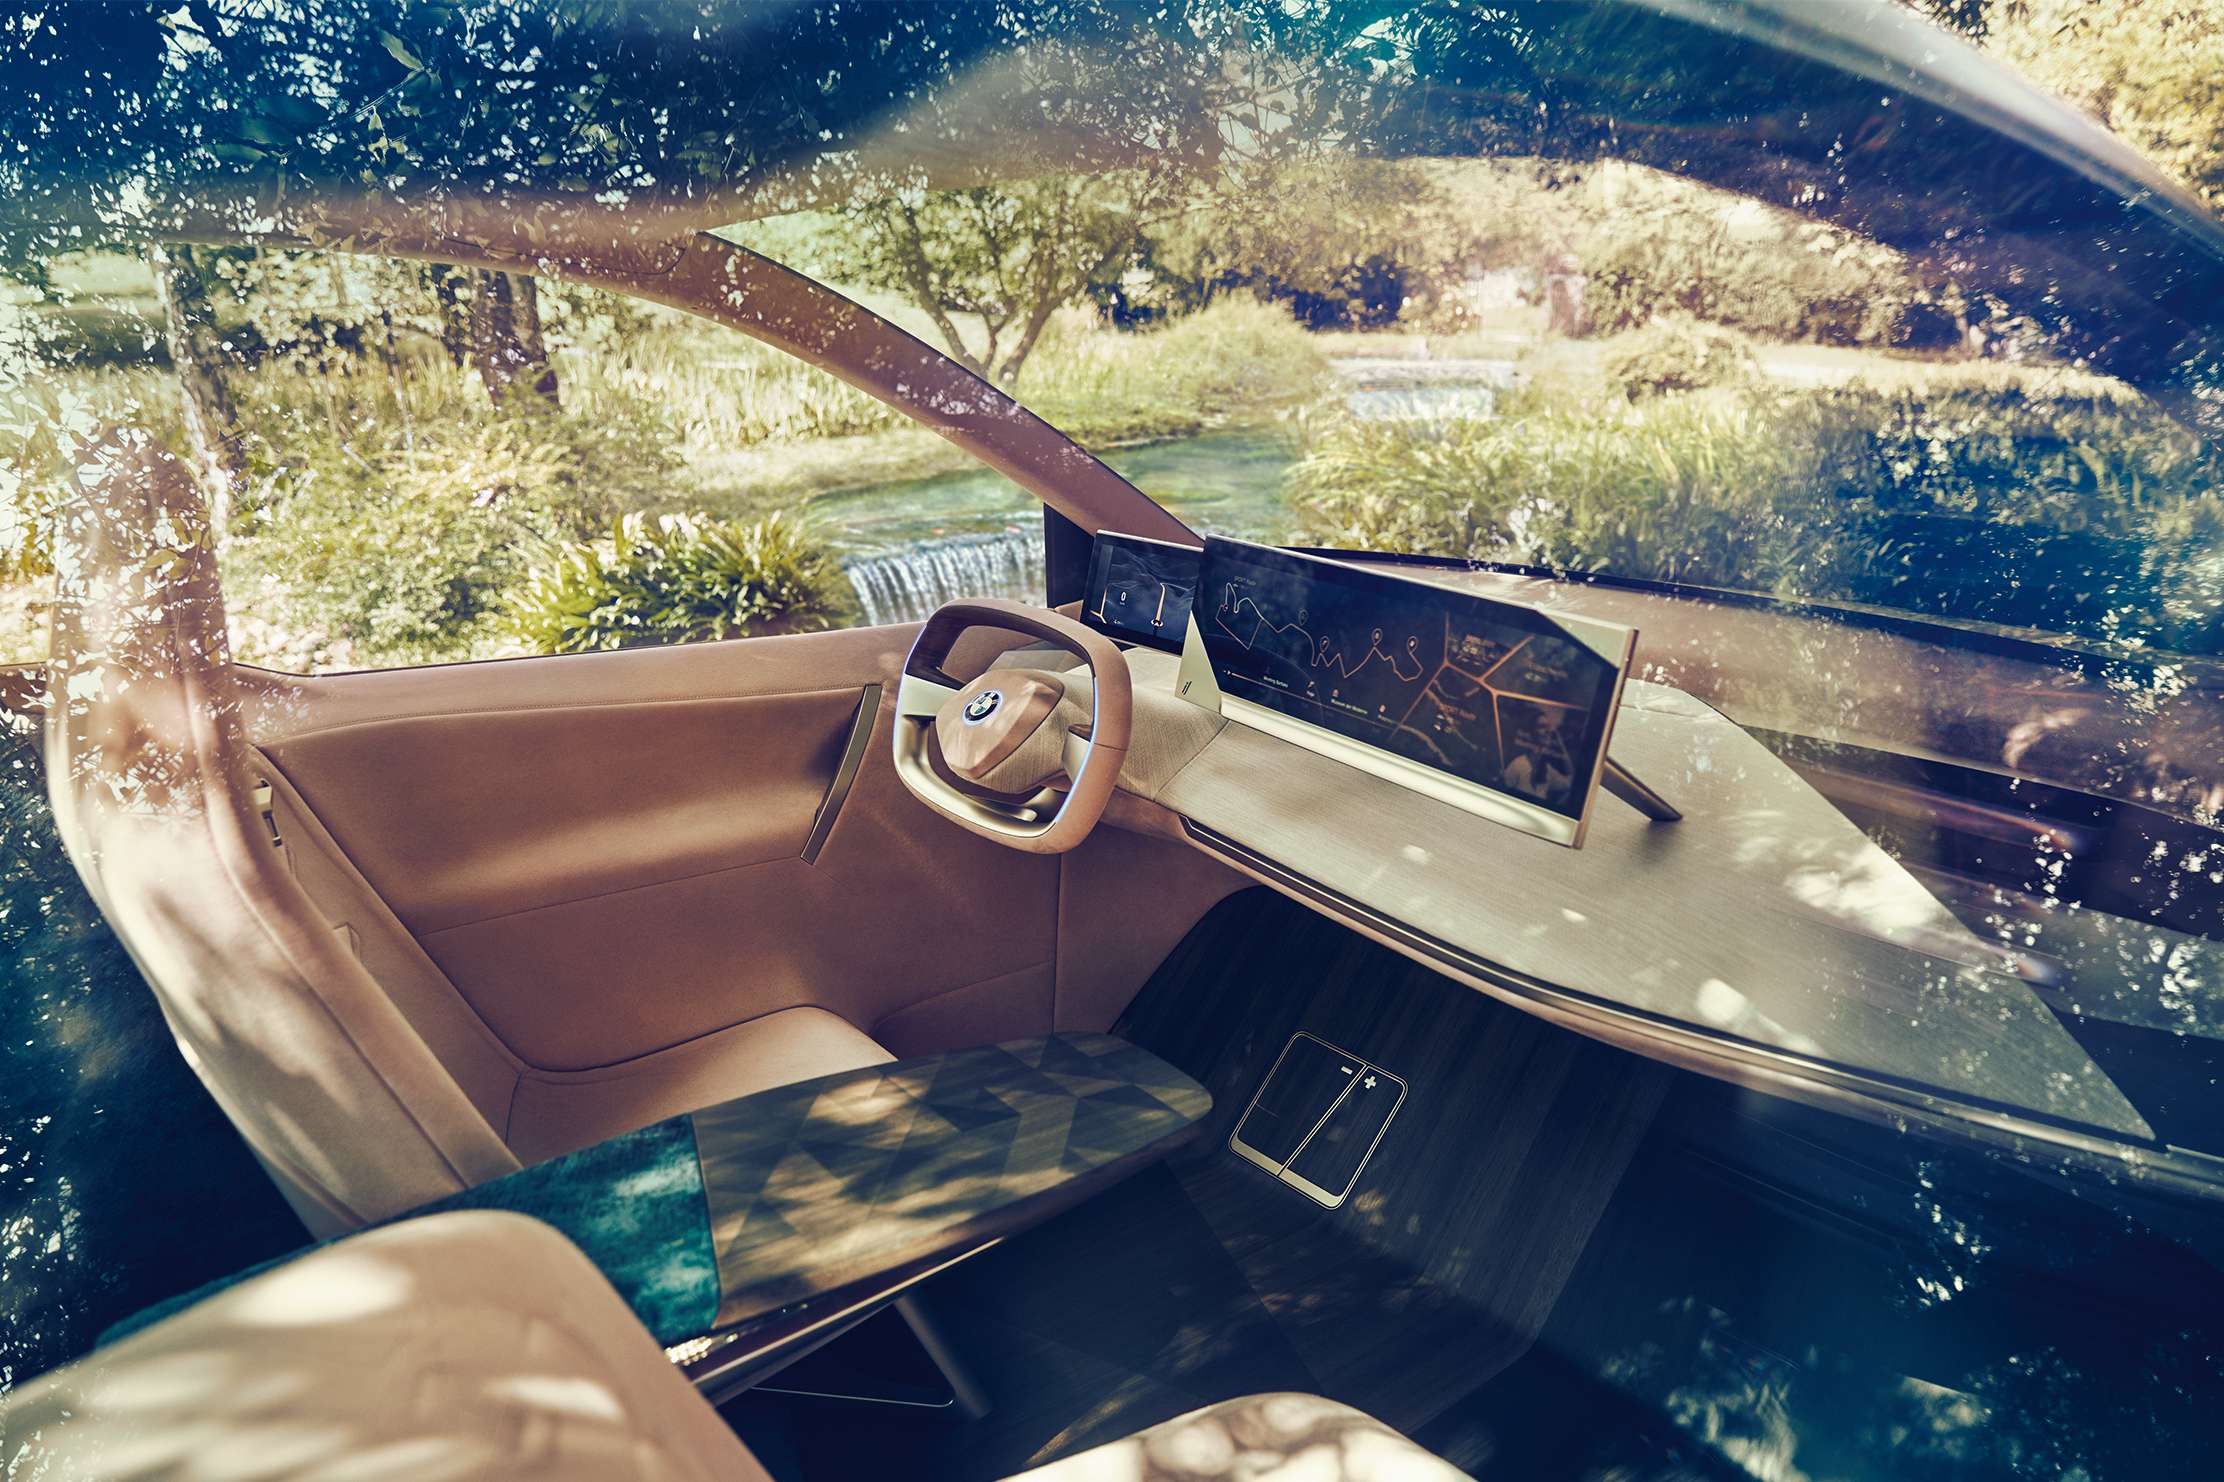 The luxurious interiors of BMW's new Vision iNext car. 